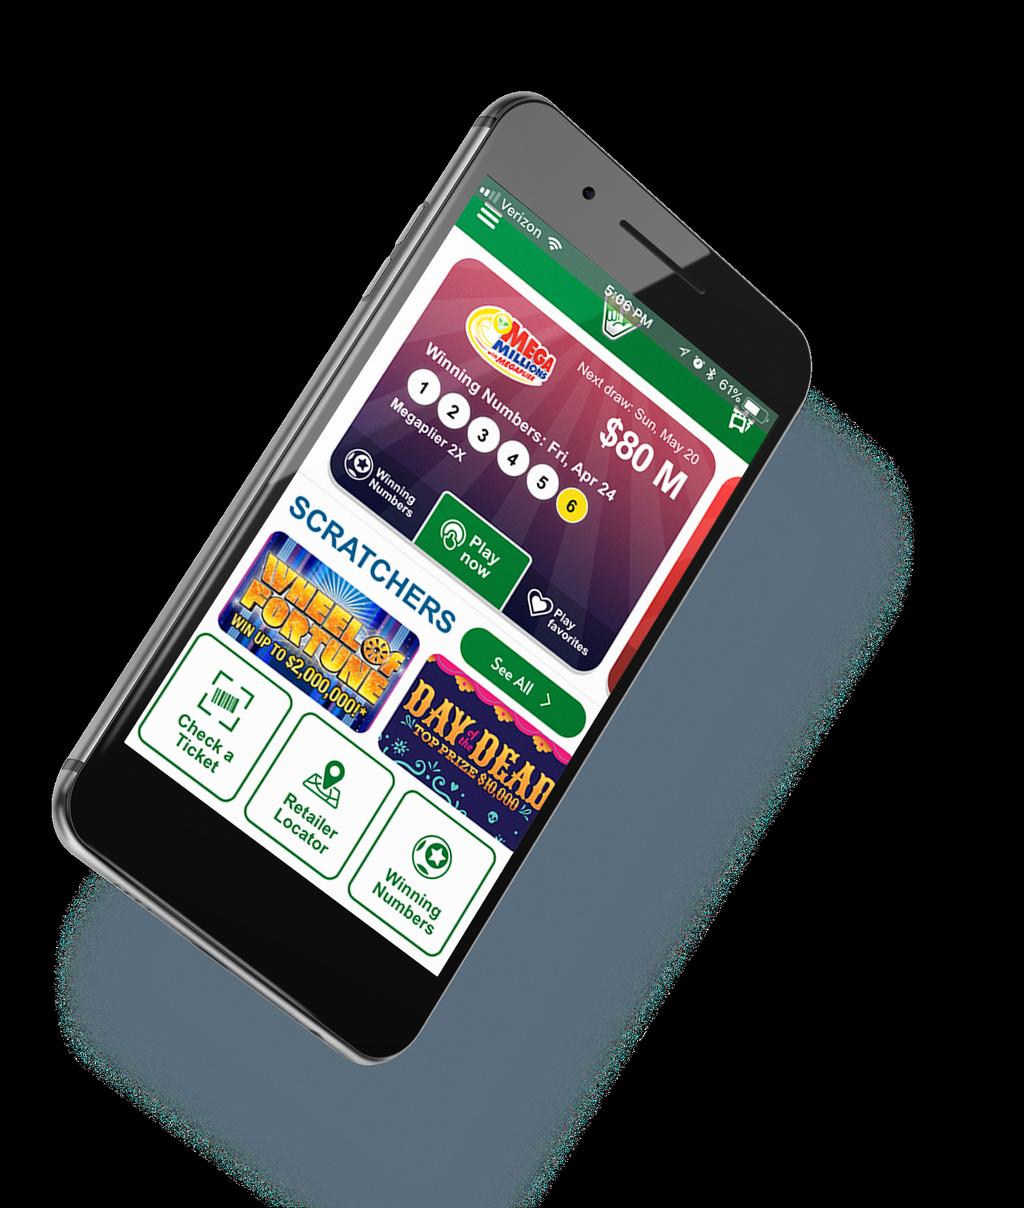 VIRGINIA LOTTERY AT YOUR FINGERTIPS DOWNLOAD THE APP JULY 16TH!